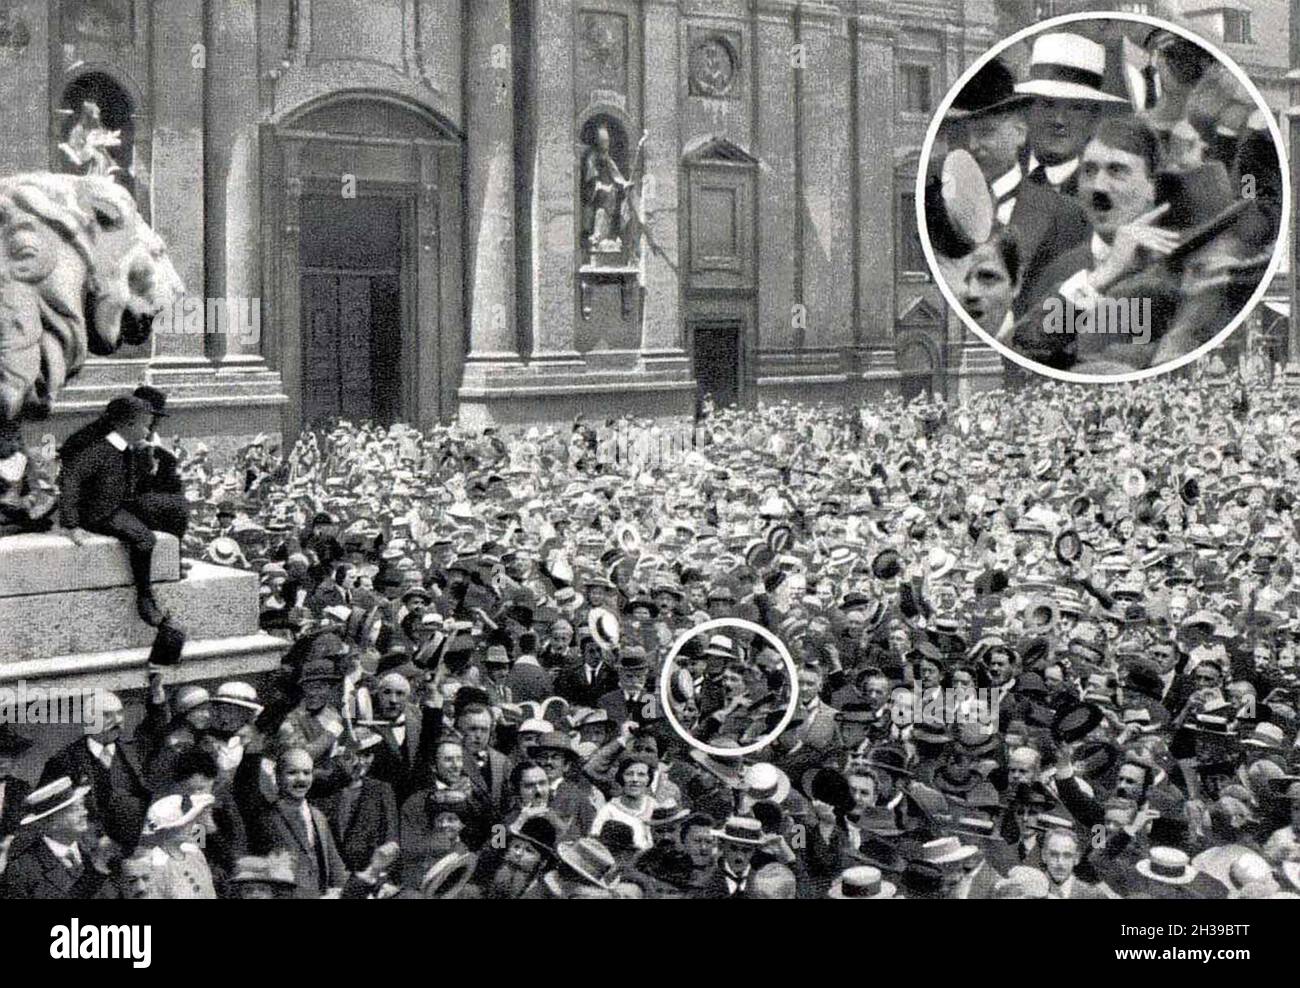 A photo showing a young Adolf Hitler celebrating the outbreak of world war 1 in the Odeonplatz in Vienna. There is some suspicion however that the photo was faked as part of Hitler's propaganda. Other images and film of the scene does not show Hitler, and the photographer was Heinrich Hoffman who became Hitler's official photographer and whose assistant was Eva Braun. More tellingly, Hitler made no mention of being there inhis autobiography Mein Kampf. Stock Photo